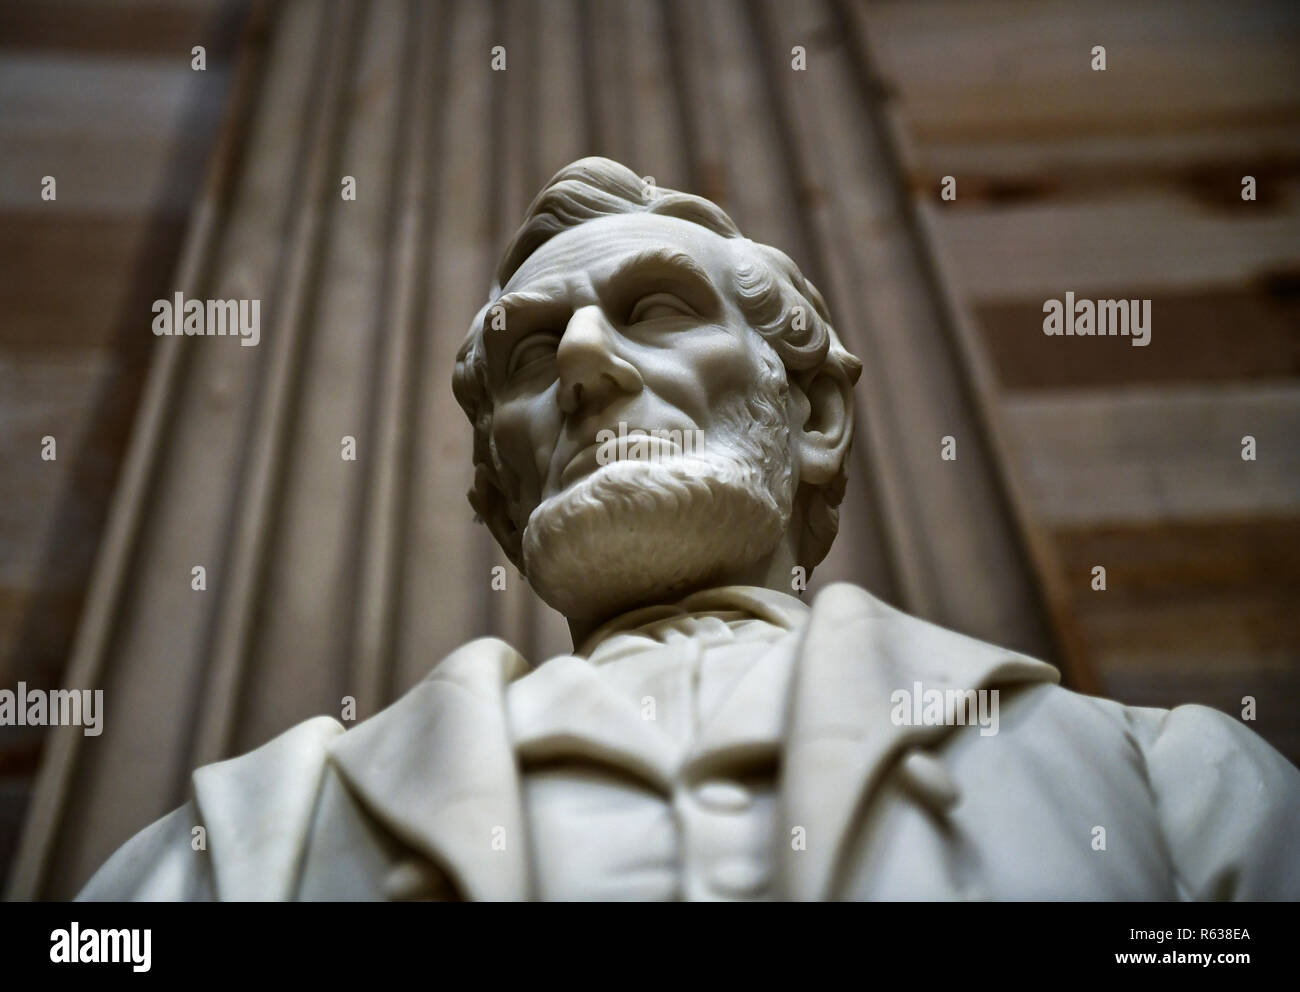 A statue of Abraham Lincoln, the 16th President of the United States, stands inside the Rotunda of the US Capitol, December 3, 2018 in Washington, DC. - The body of the late former President George H.W. Bush will travel from Houston to Washington, where he will lie in state at the US Capitol through Wednesday morning. Bush, who died on November 30, will return to Houston for his funeral on Thursday. (Photo by Brendan Smialowski/AFP)/POOL PHOTO | usage worldwide Stock Photo